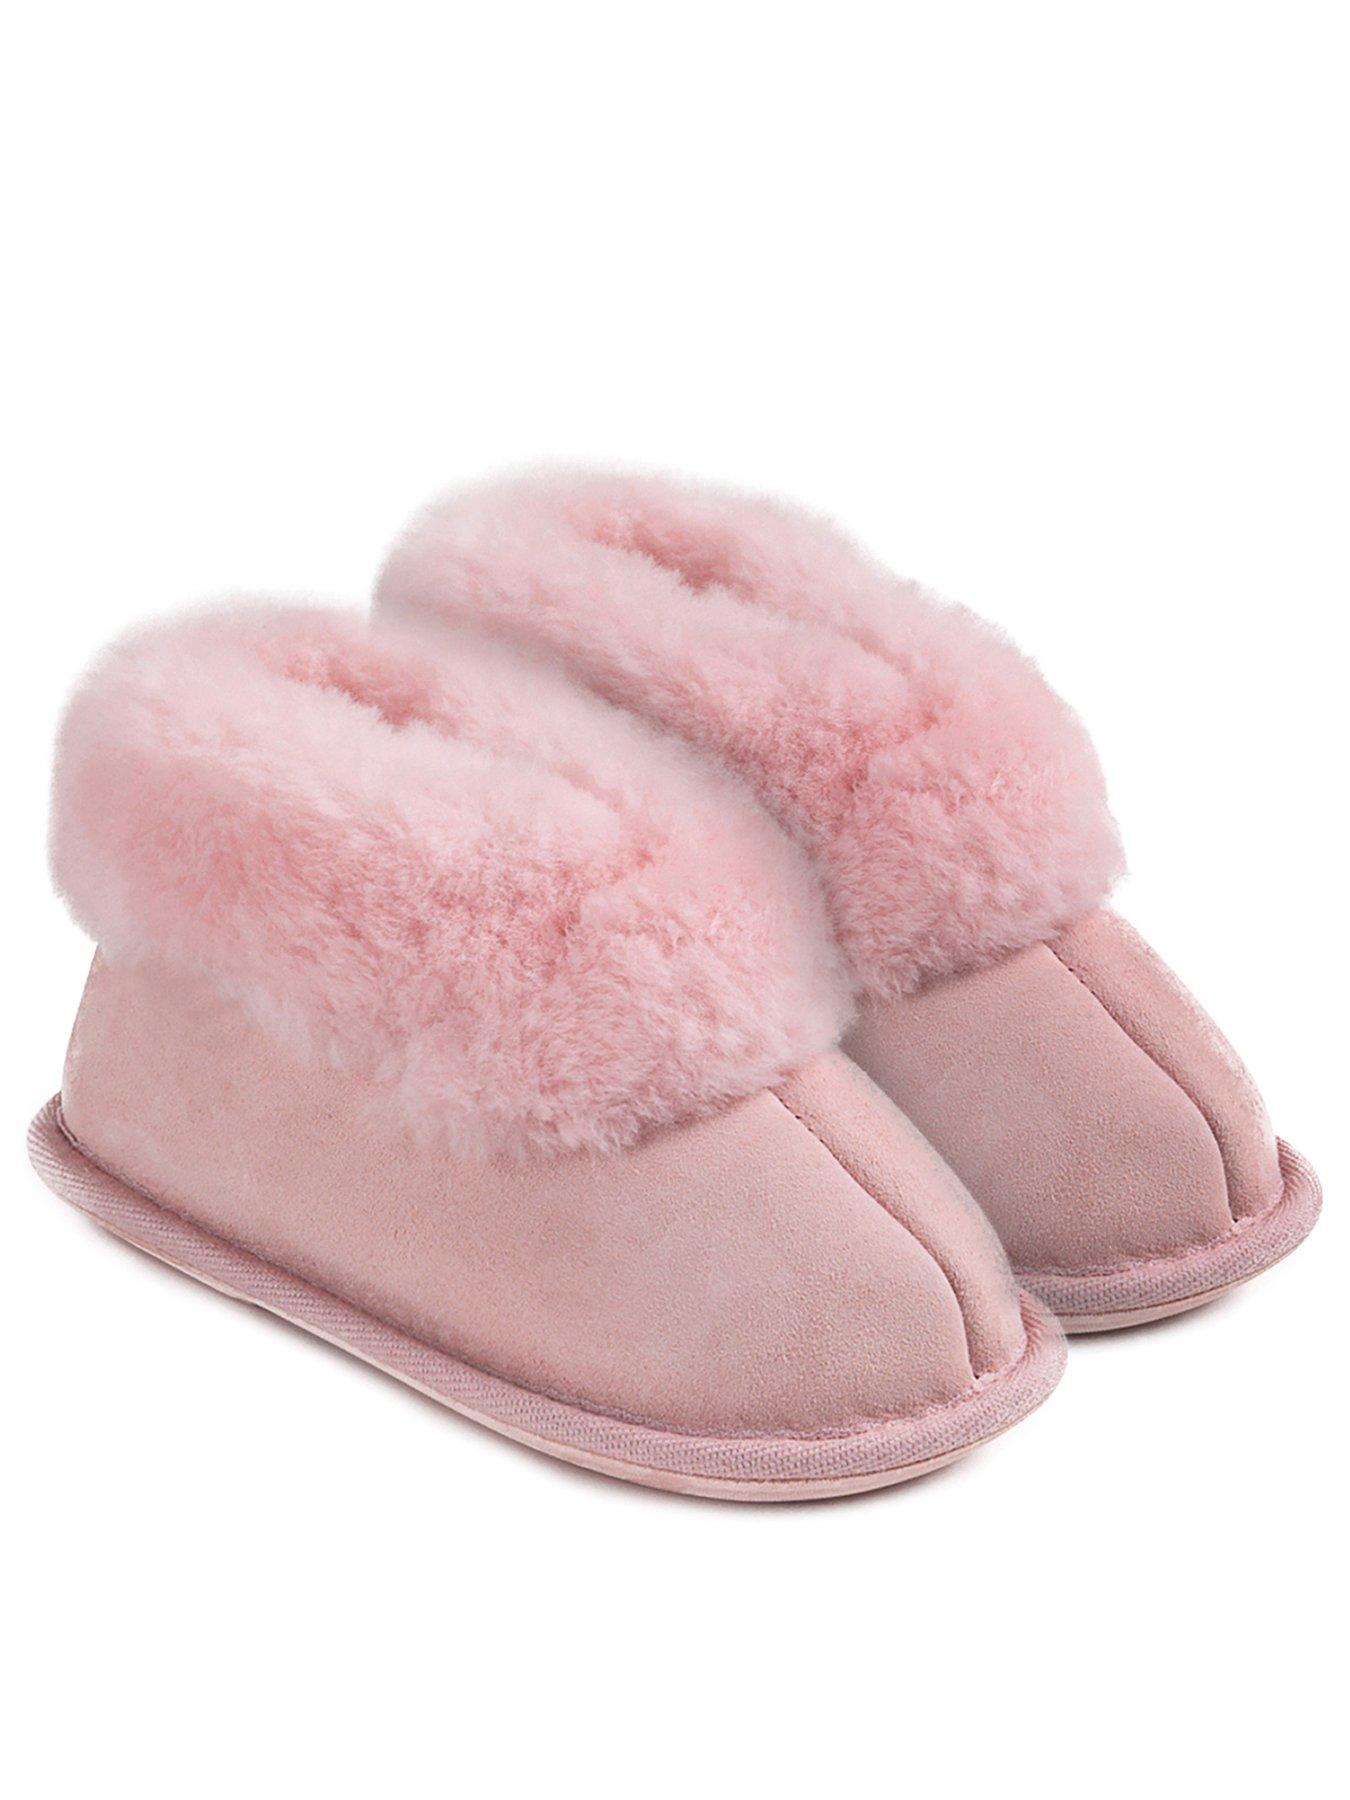 Shoes & boots Kids Classic Slippers - Baby Pink